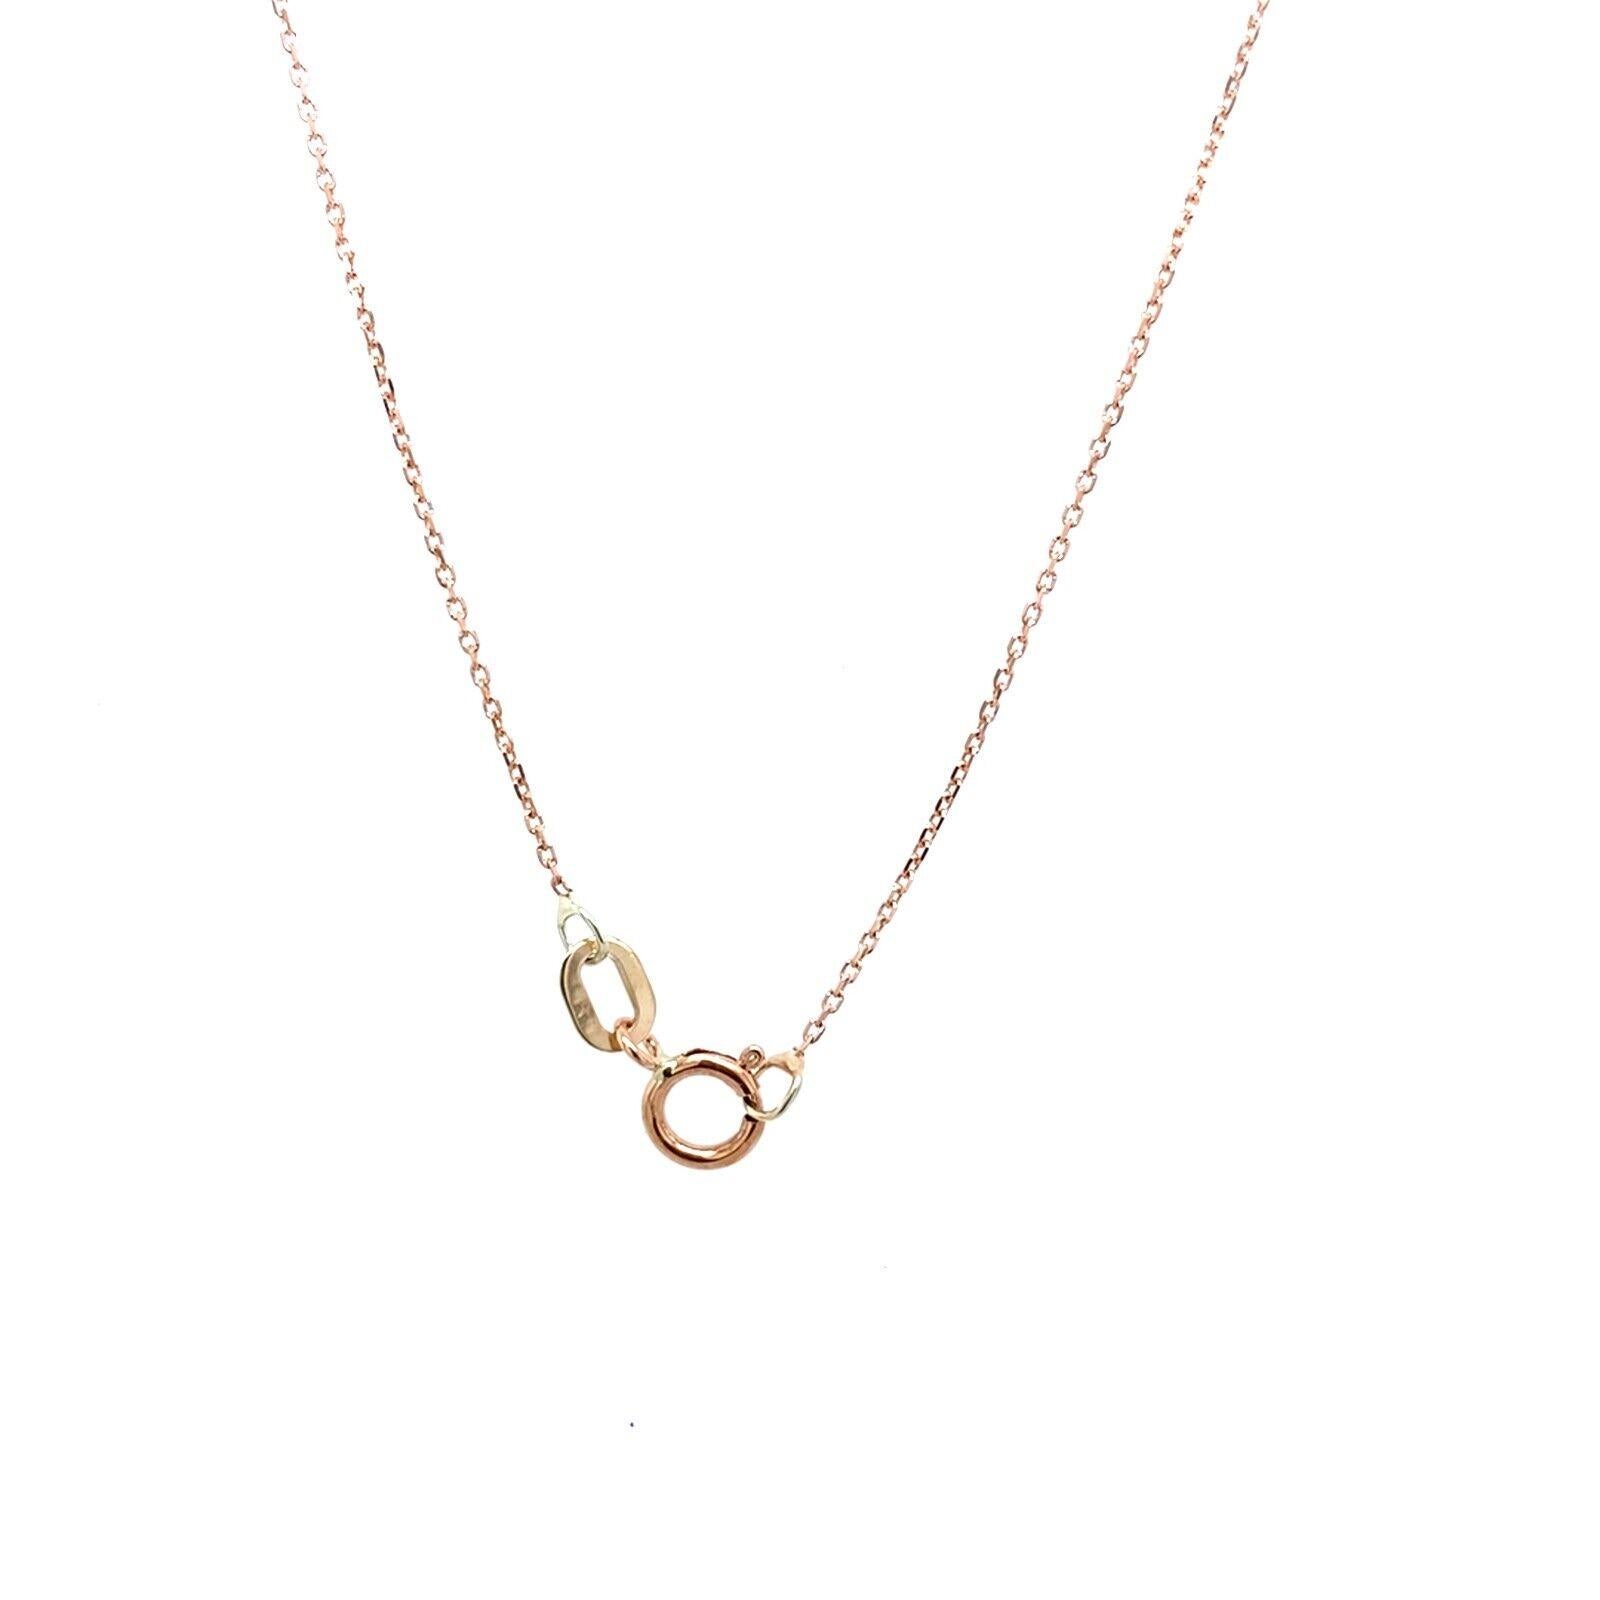 The 9ct Rose Gold Diamond star pendant is a stunning and elegant piece of jewellery that features a total of 0.15ct of Diamonds and a 9ct Rose Gold setting. The pendant is a beautiful and meaningful gift that is perfect for a loved one.

Additional